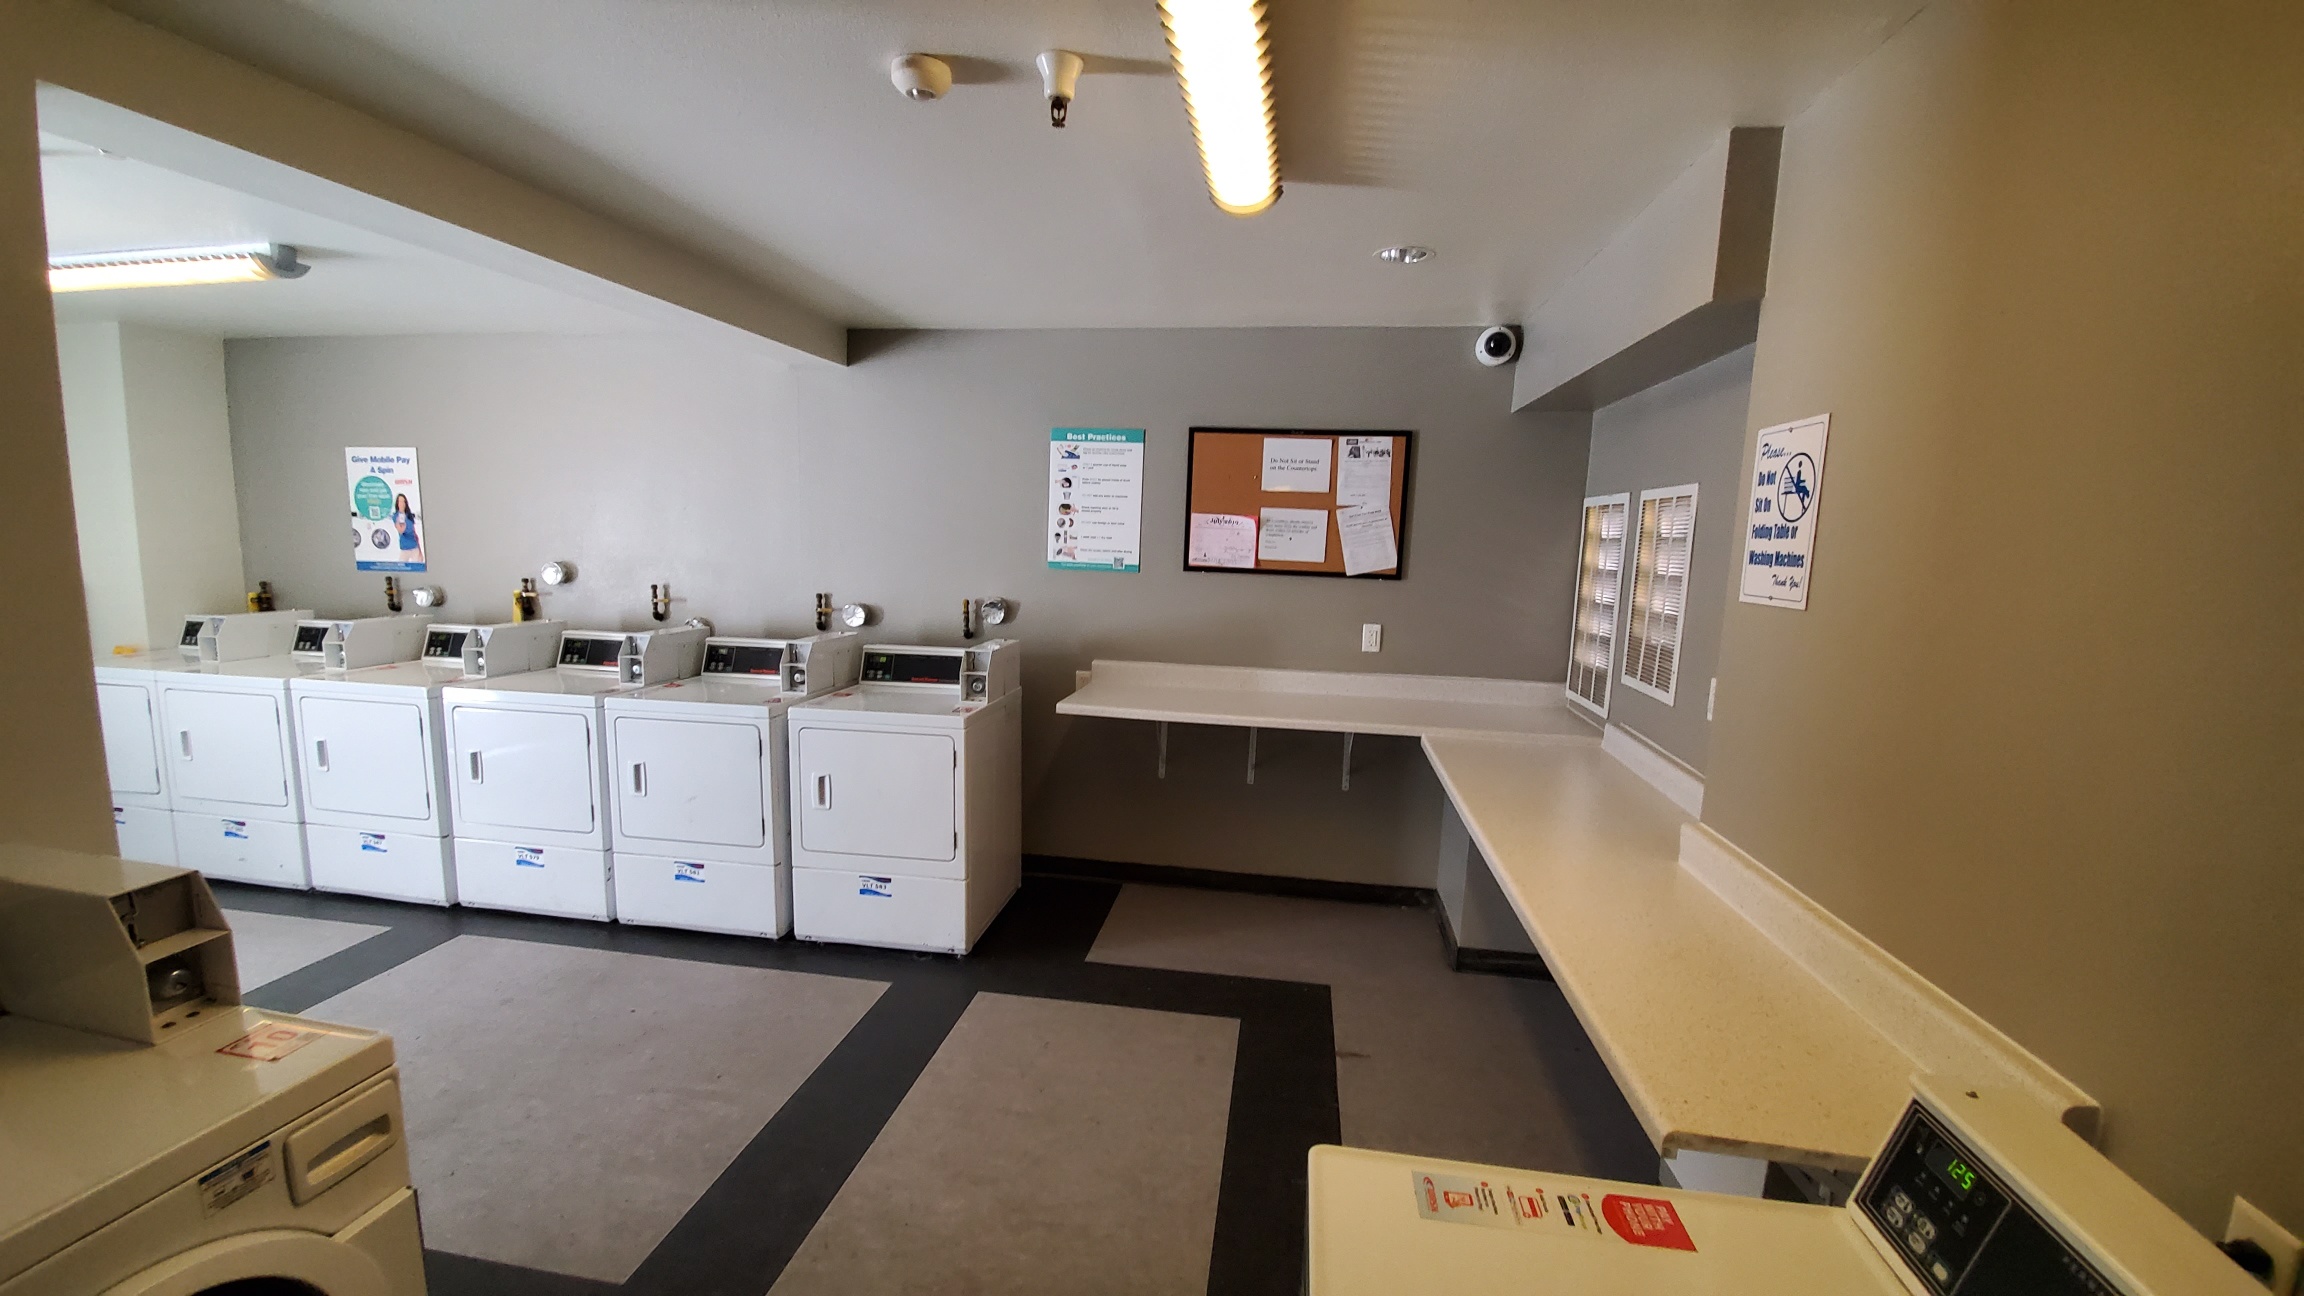 Laundry room with multiple washer and dryer machines. Room has a shelf for folding that is L shapes along the walls. There is a security camera on an upper corner of the room, and posted signs across the walls. Floor area is spacious.